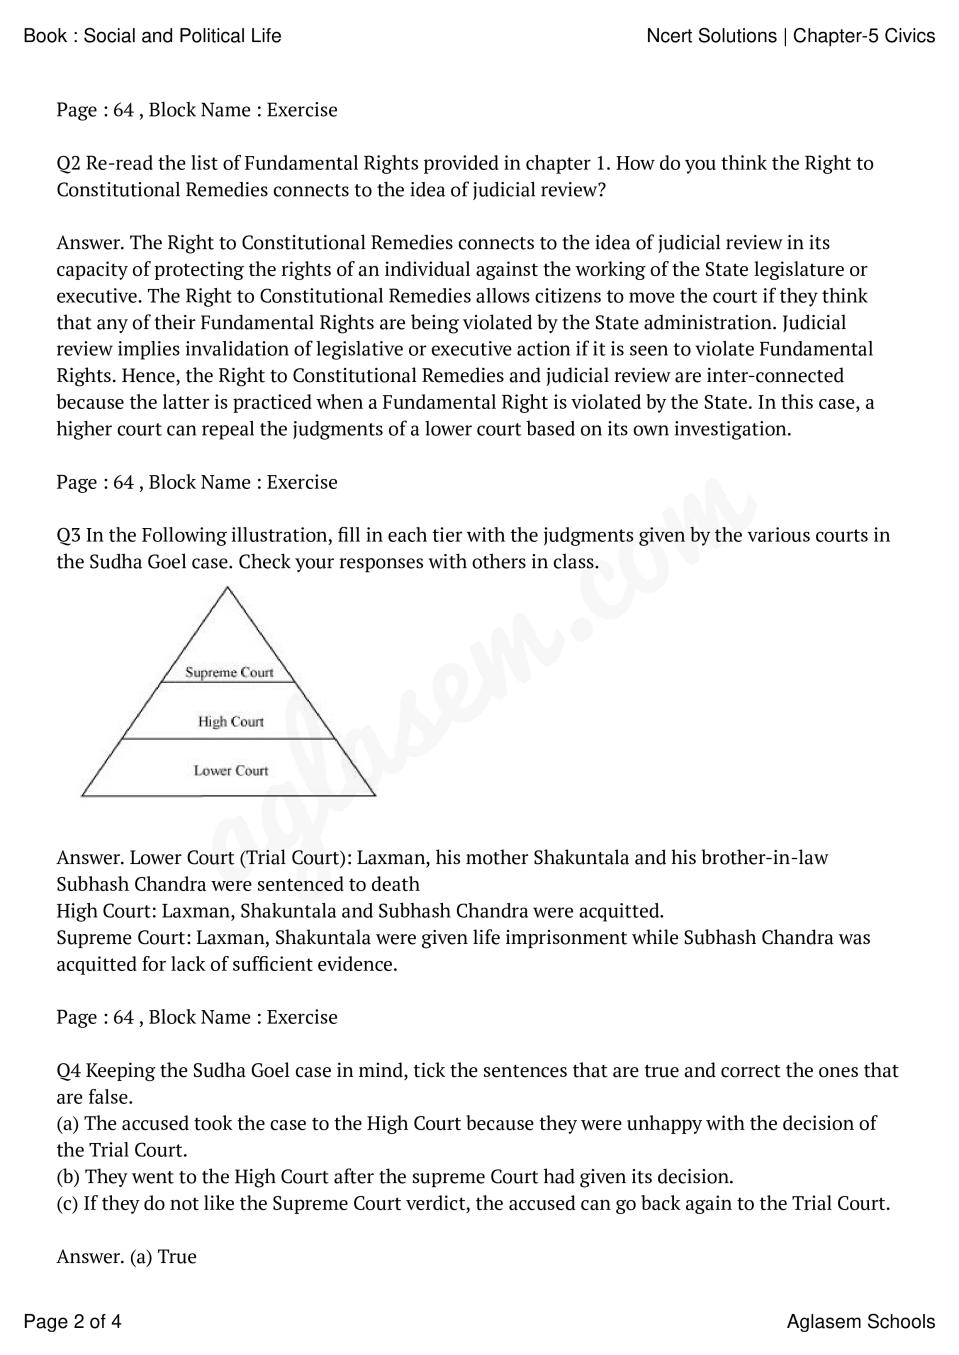 ncert-solutions-for-class-8-civics-chapter-4-judiciary-pdf